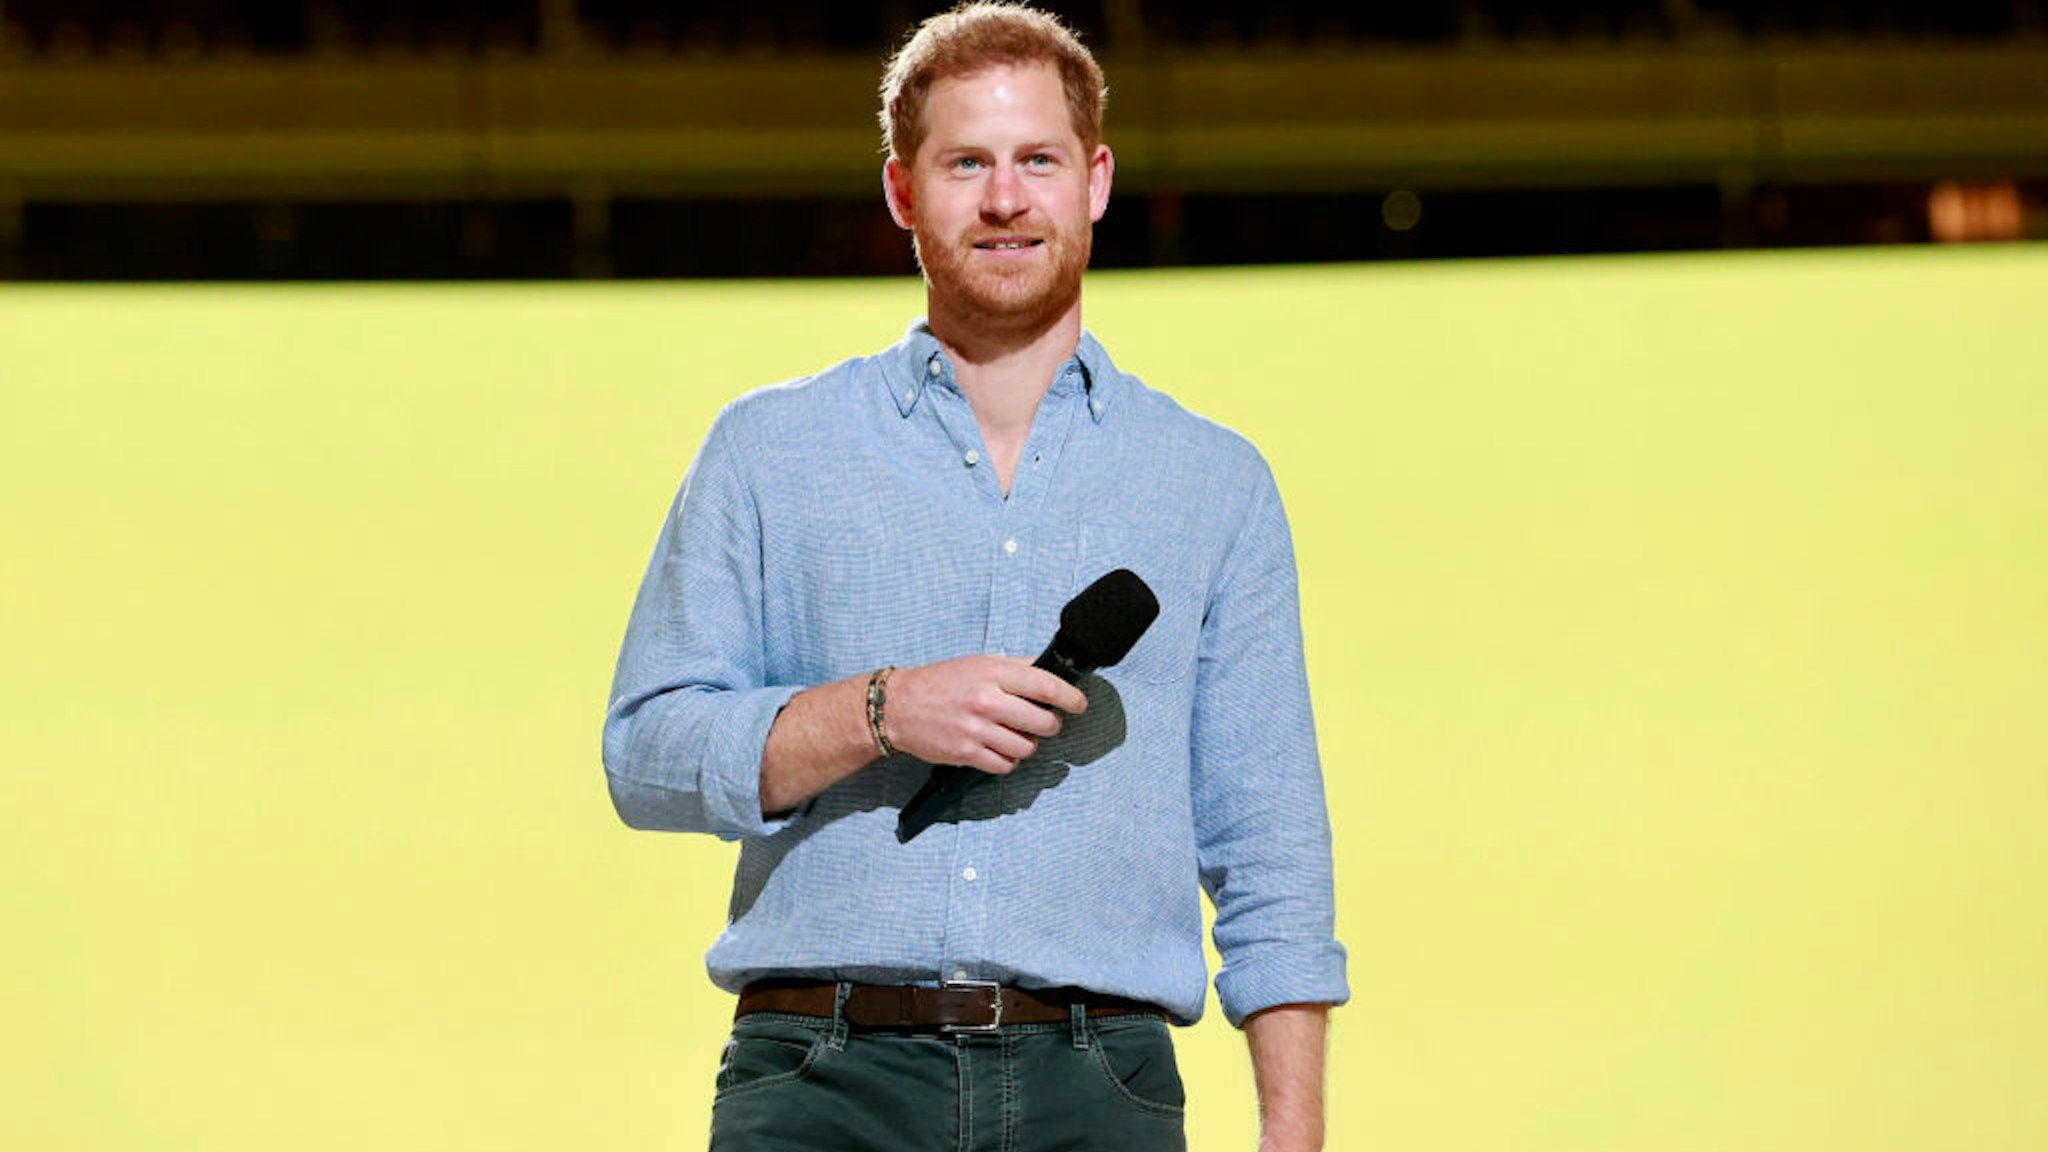 INGLEWOOD, CALIFORNIA: In this image released on May 2, Prince Harry, Duke of Sussex speaks onstage during Global Citizen VAX LIVE: The Concert To Reunite The World at SoFi Stadium in Inglewood, California. Global Citizen VAX LIVE: The Concert To Reunite The World will be broadcast on May 8, 2021. (Photo by Emma McIntyre/Getty Images for Global Citizen VAX LIVE)